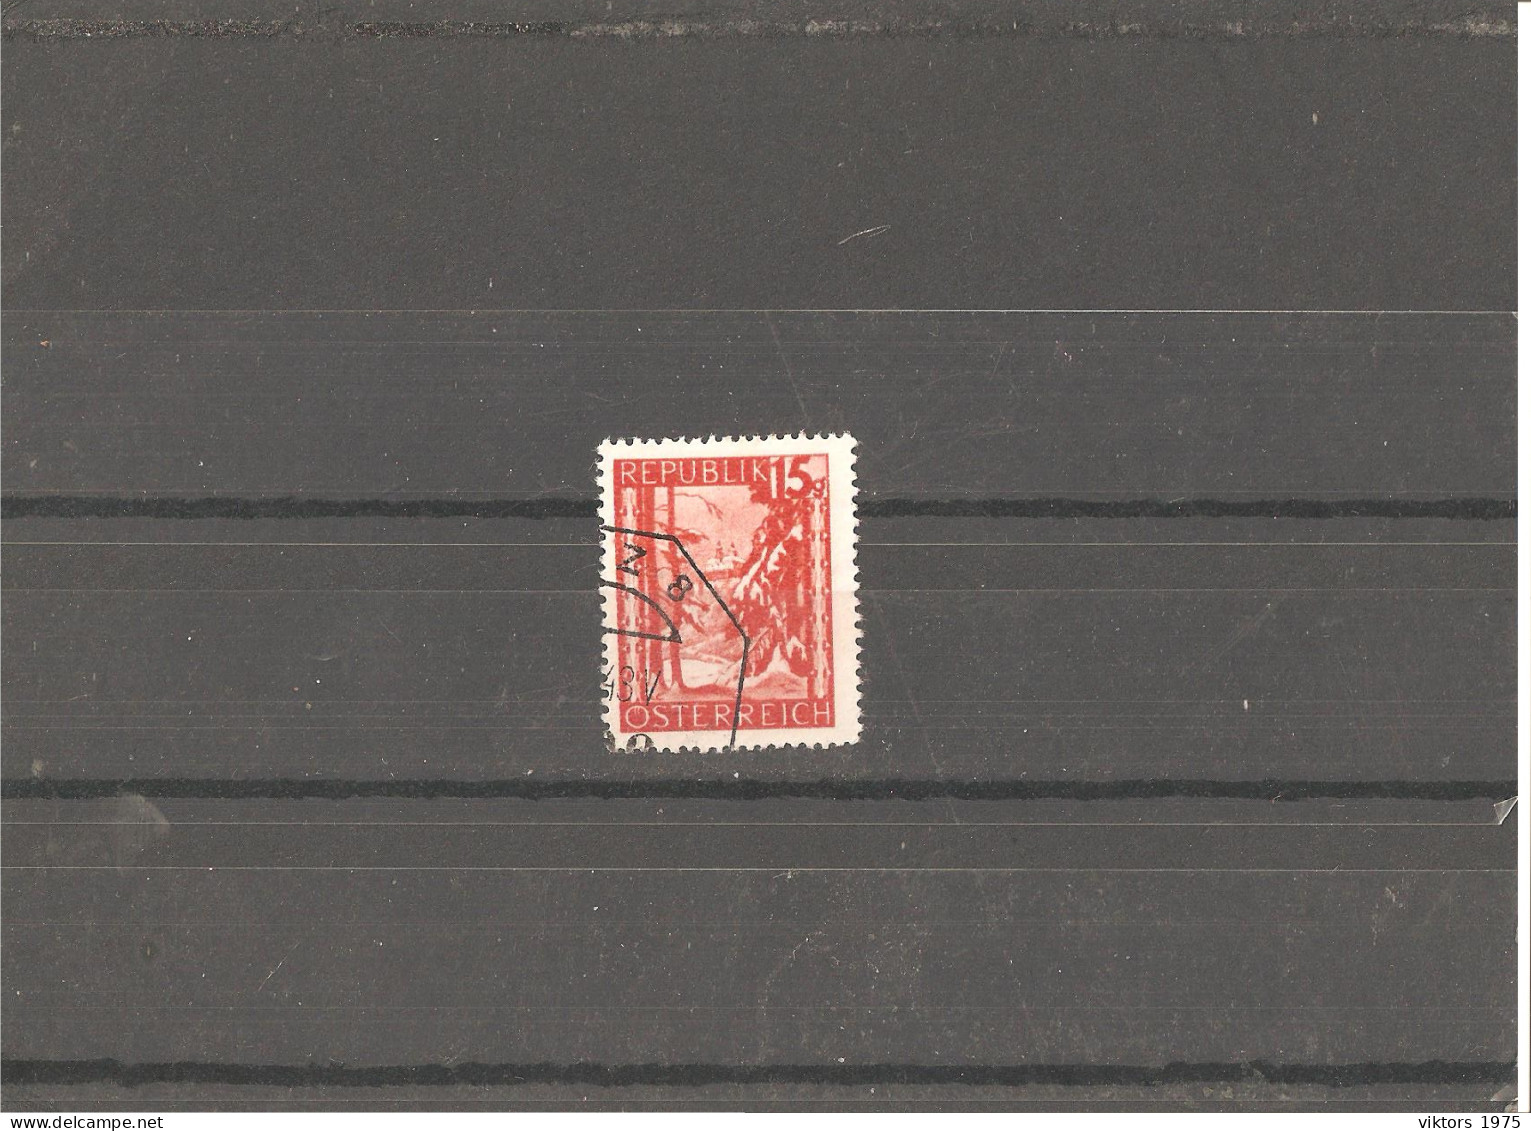 Used Stamp Nr.841 In MICHEL Catalog - Used Stamps